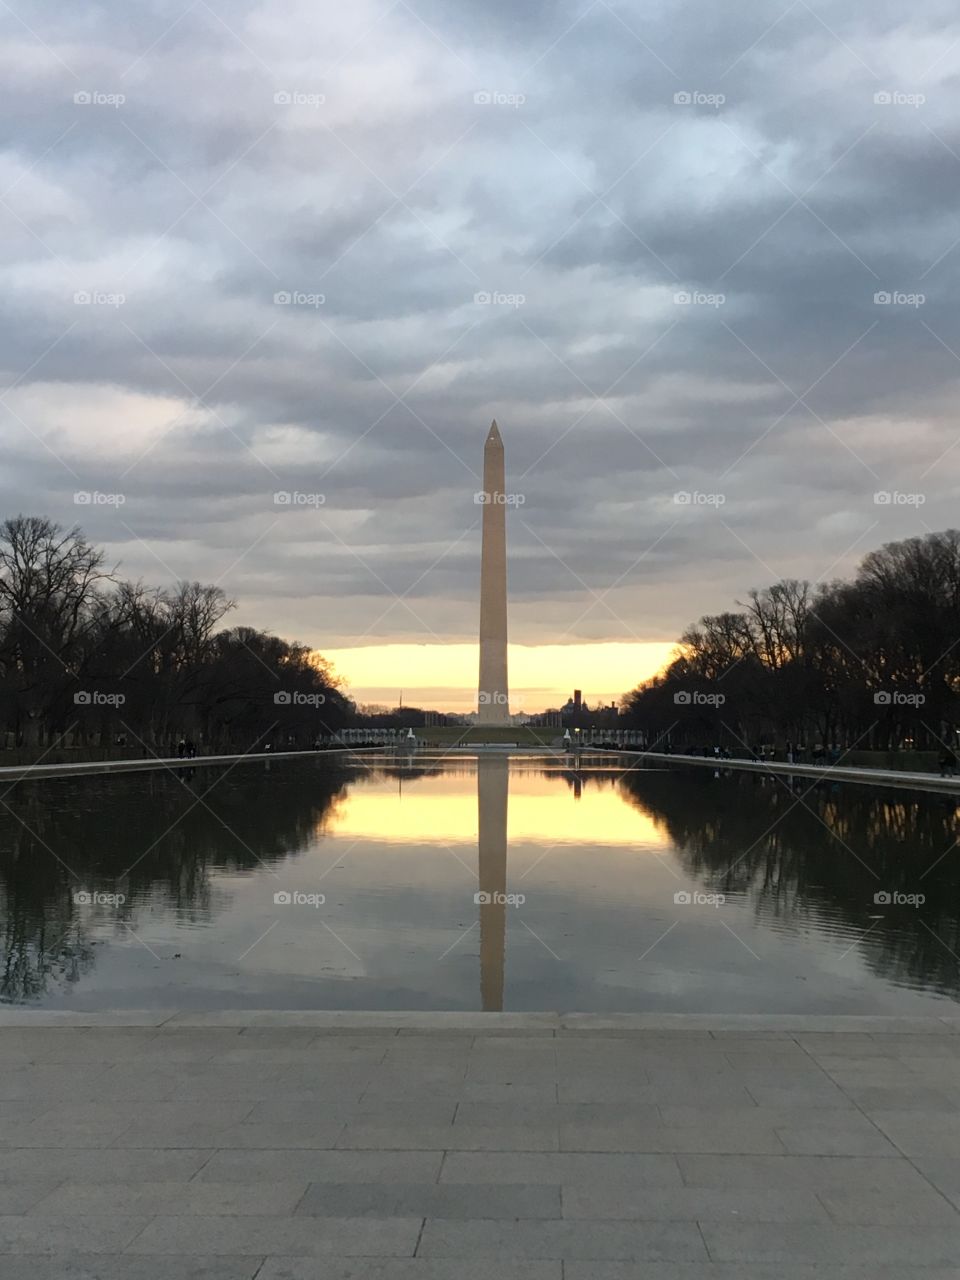 Sunset over the reflecting pool and behind the Washington monument of Washington DC. The overcast skies part slightly to let the last light of the day through